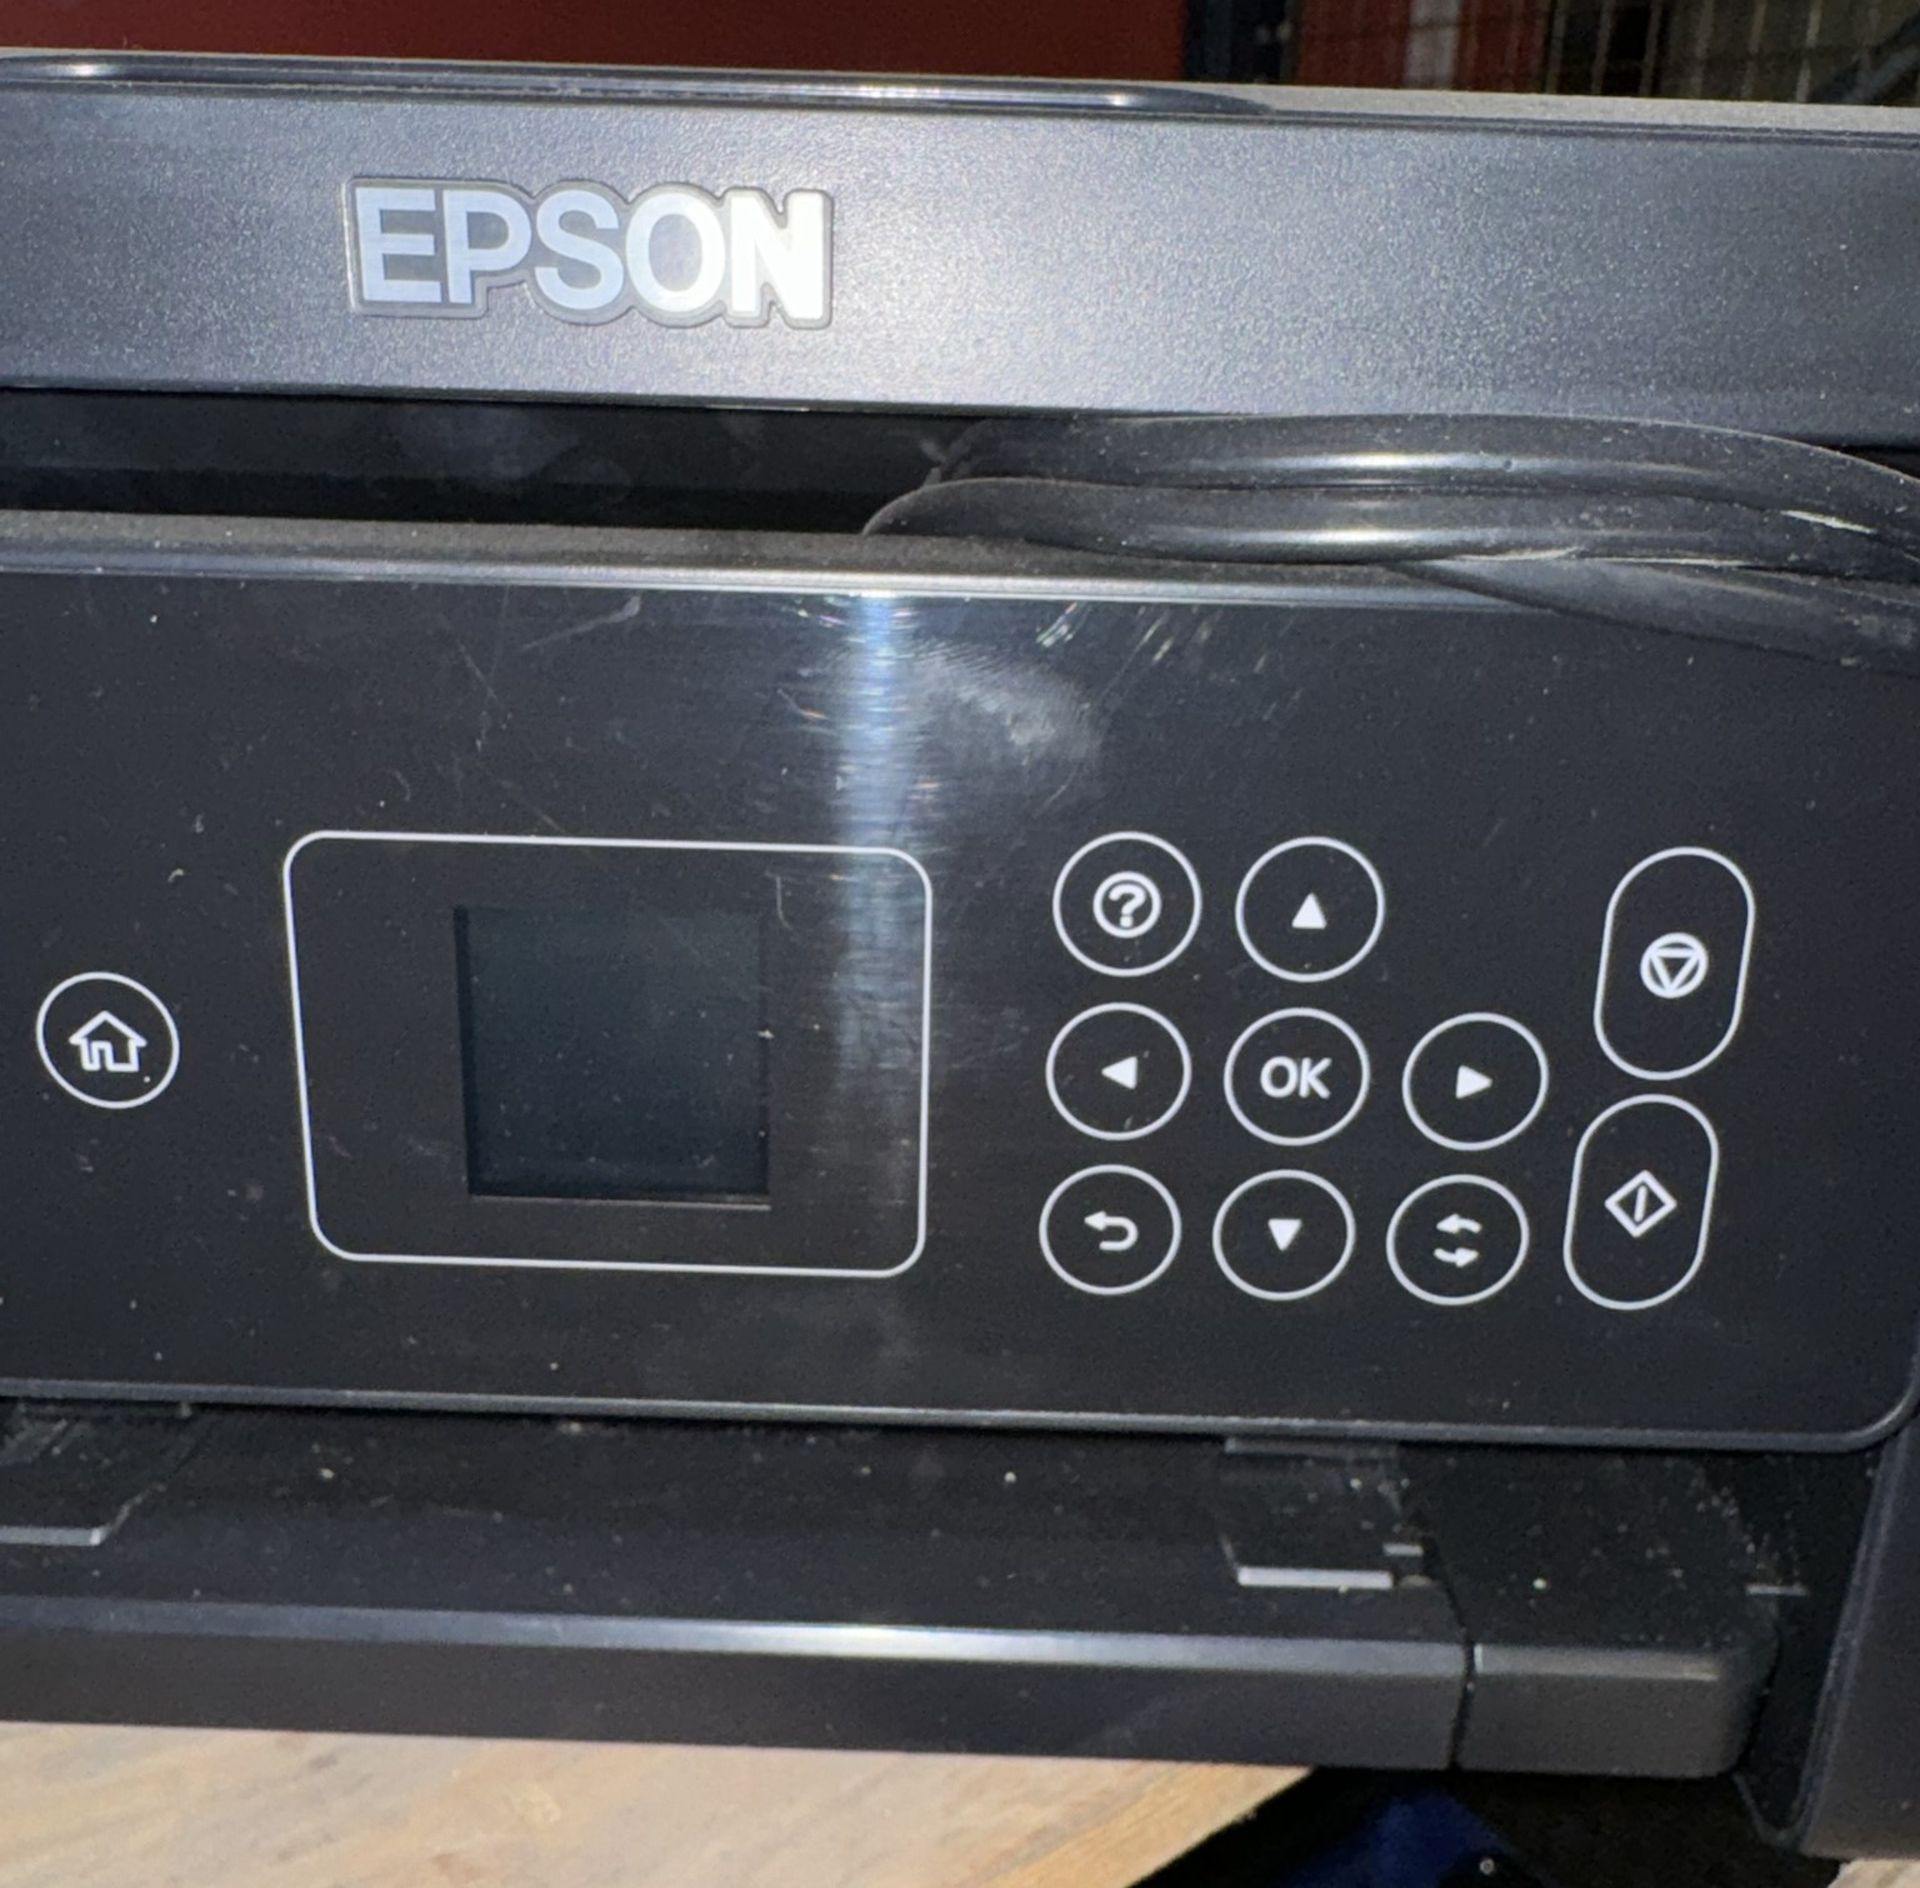 Epson C636A All-in-One Wireless Inkjet Printer - Image 3 of 5